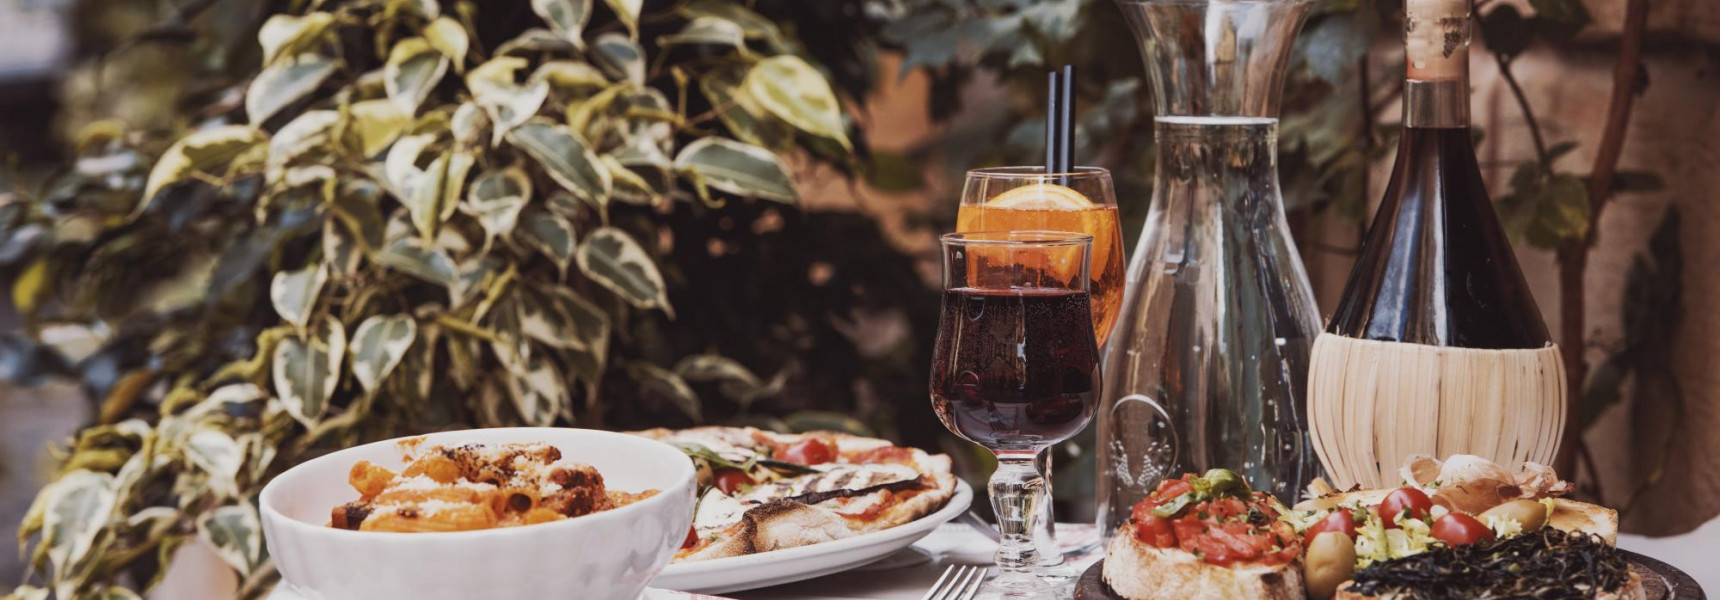 Top 5 Food and Drink Experiences in Rome